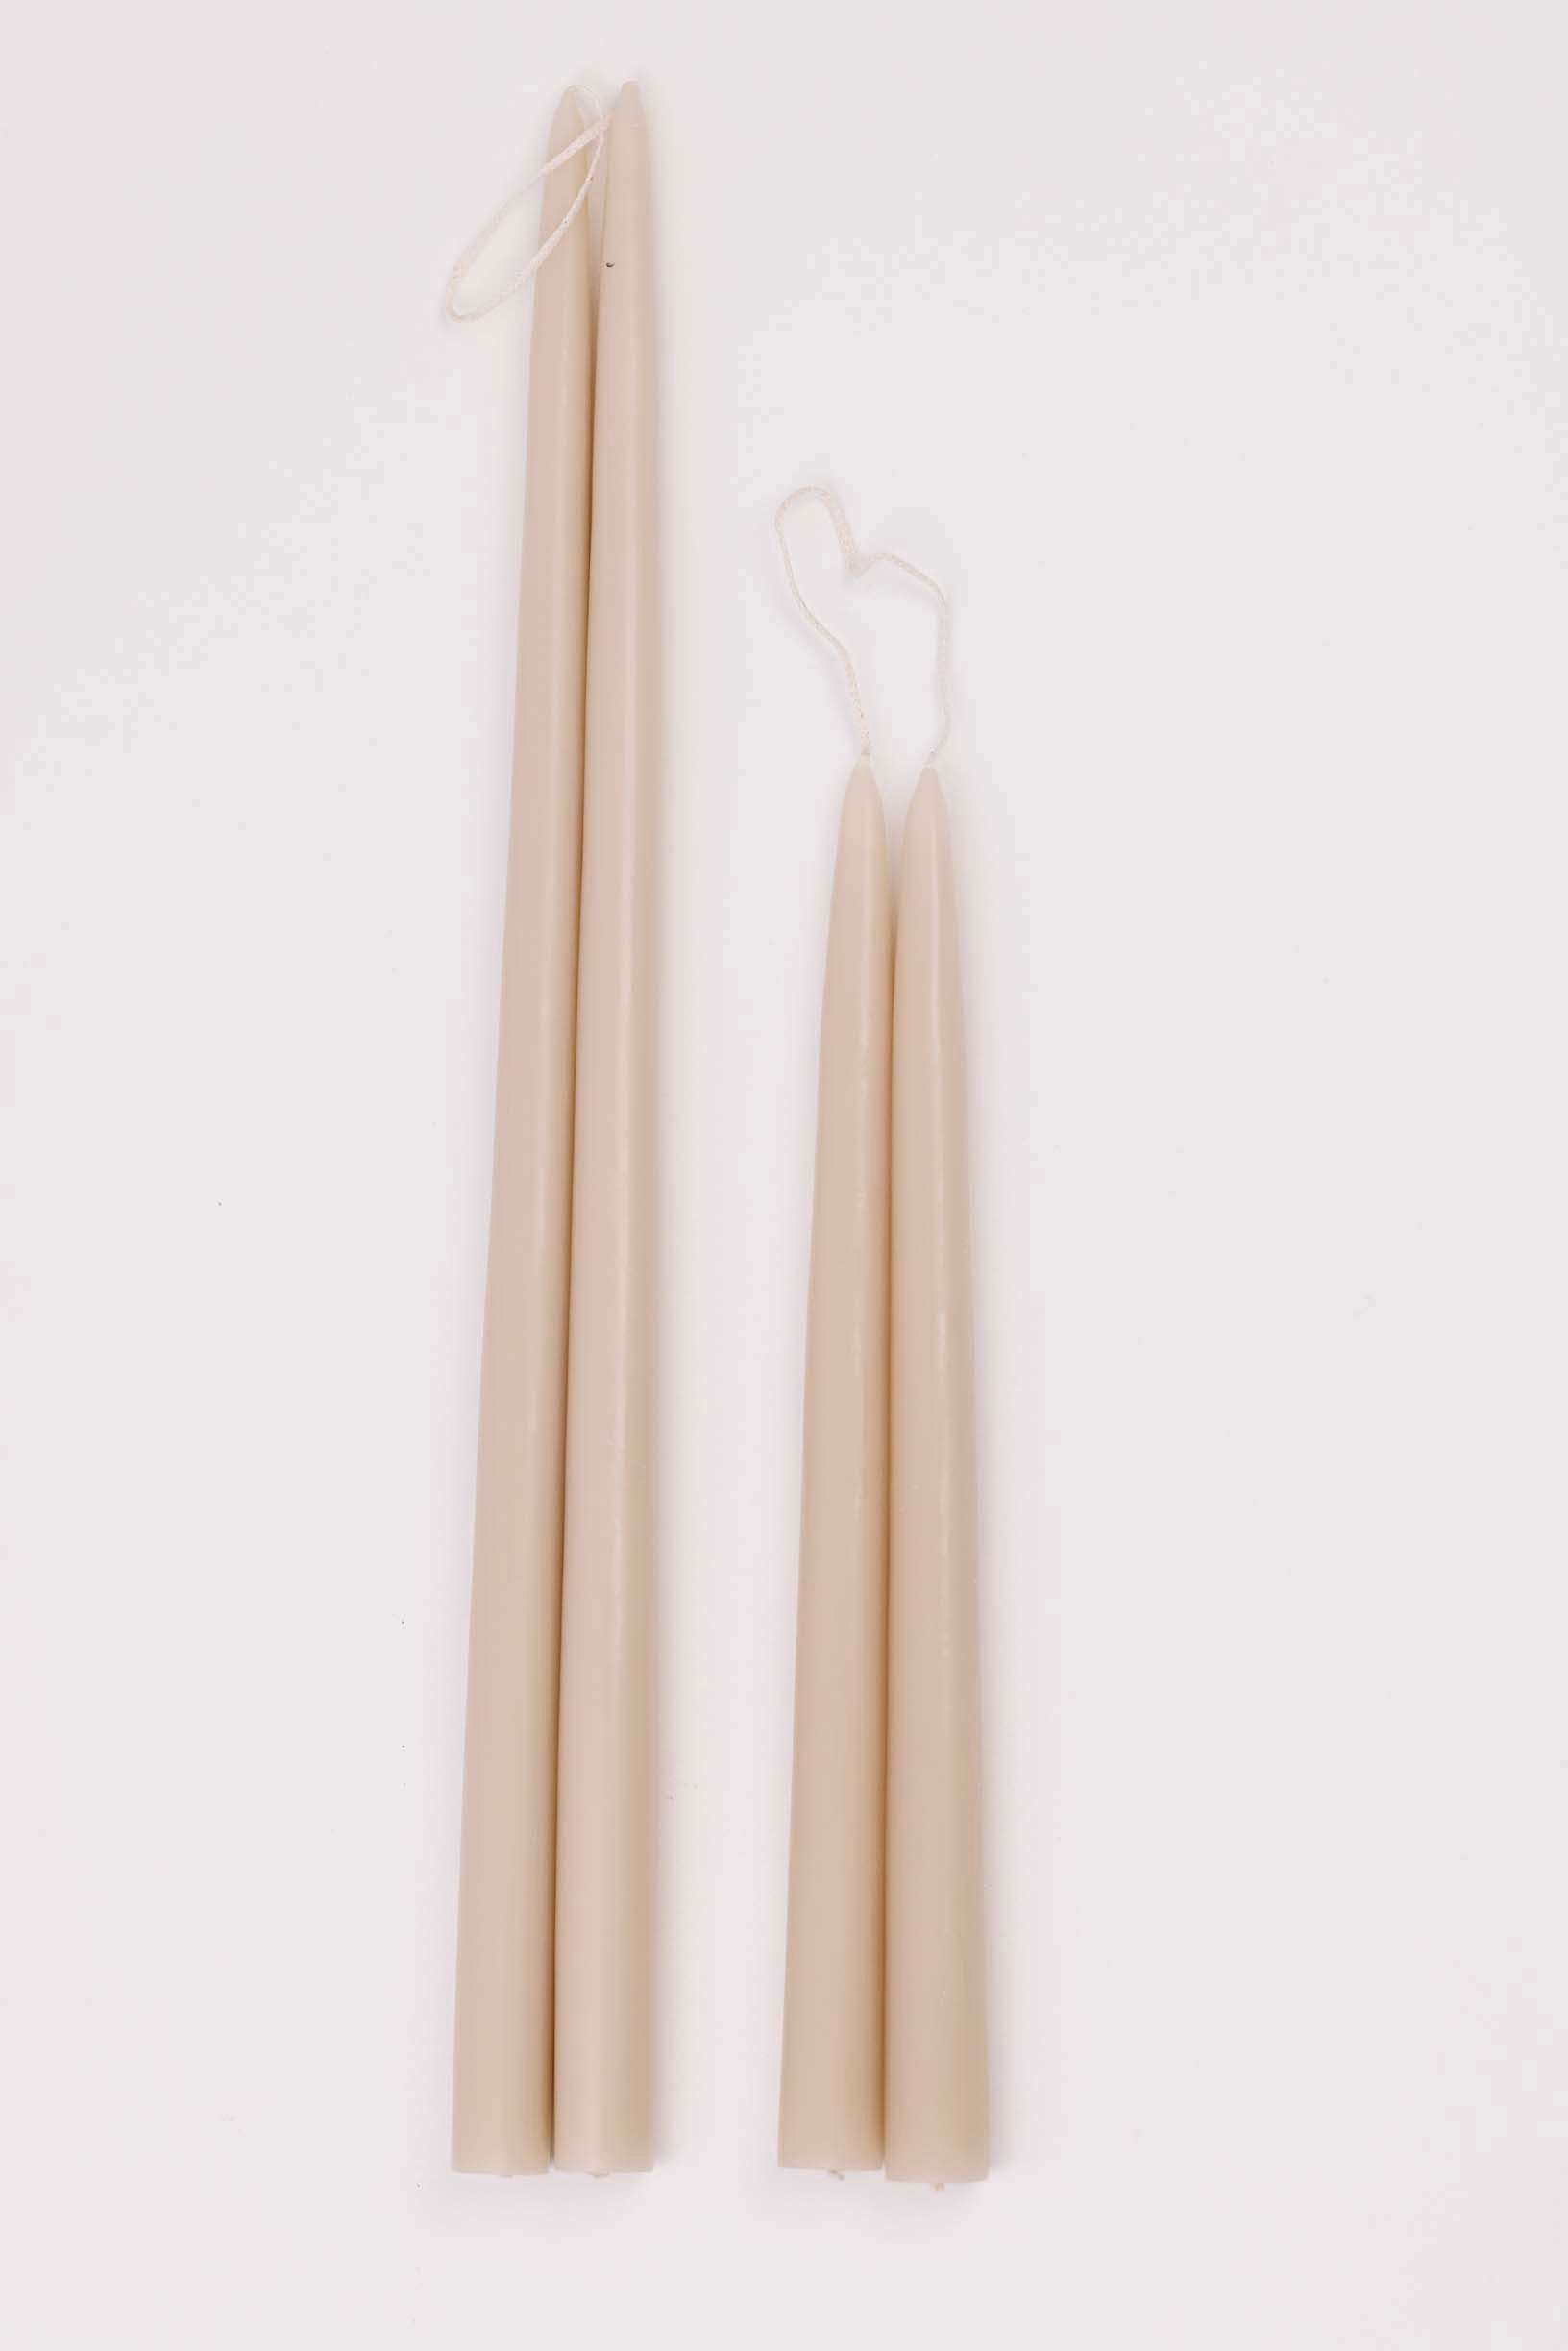 Ivory Taper Candles - 2 Sizes